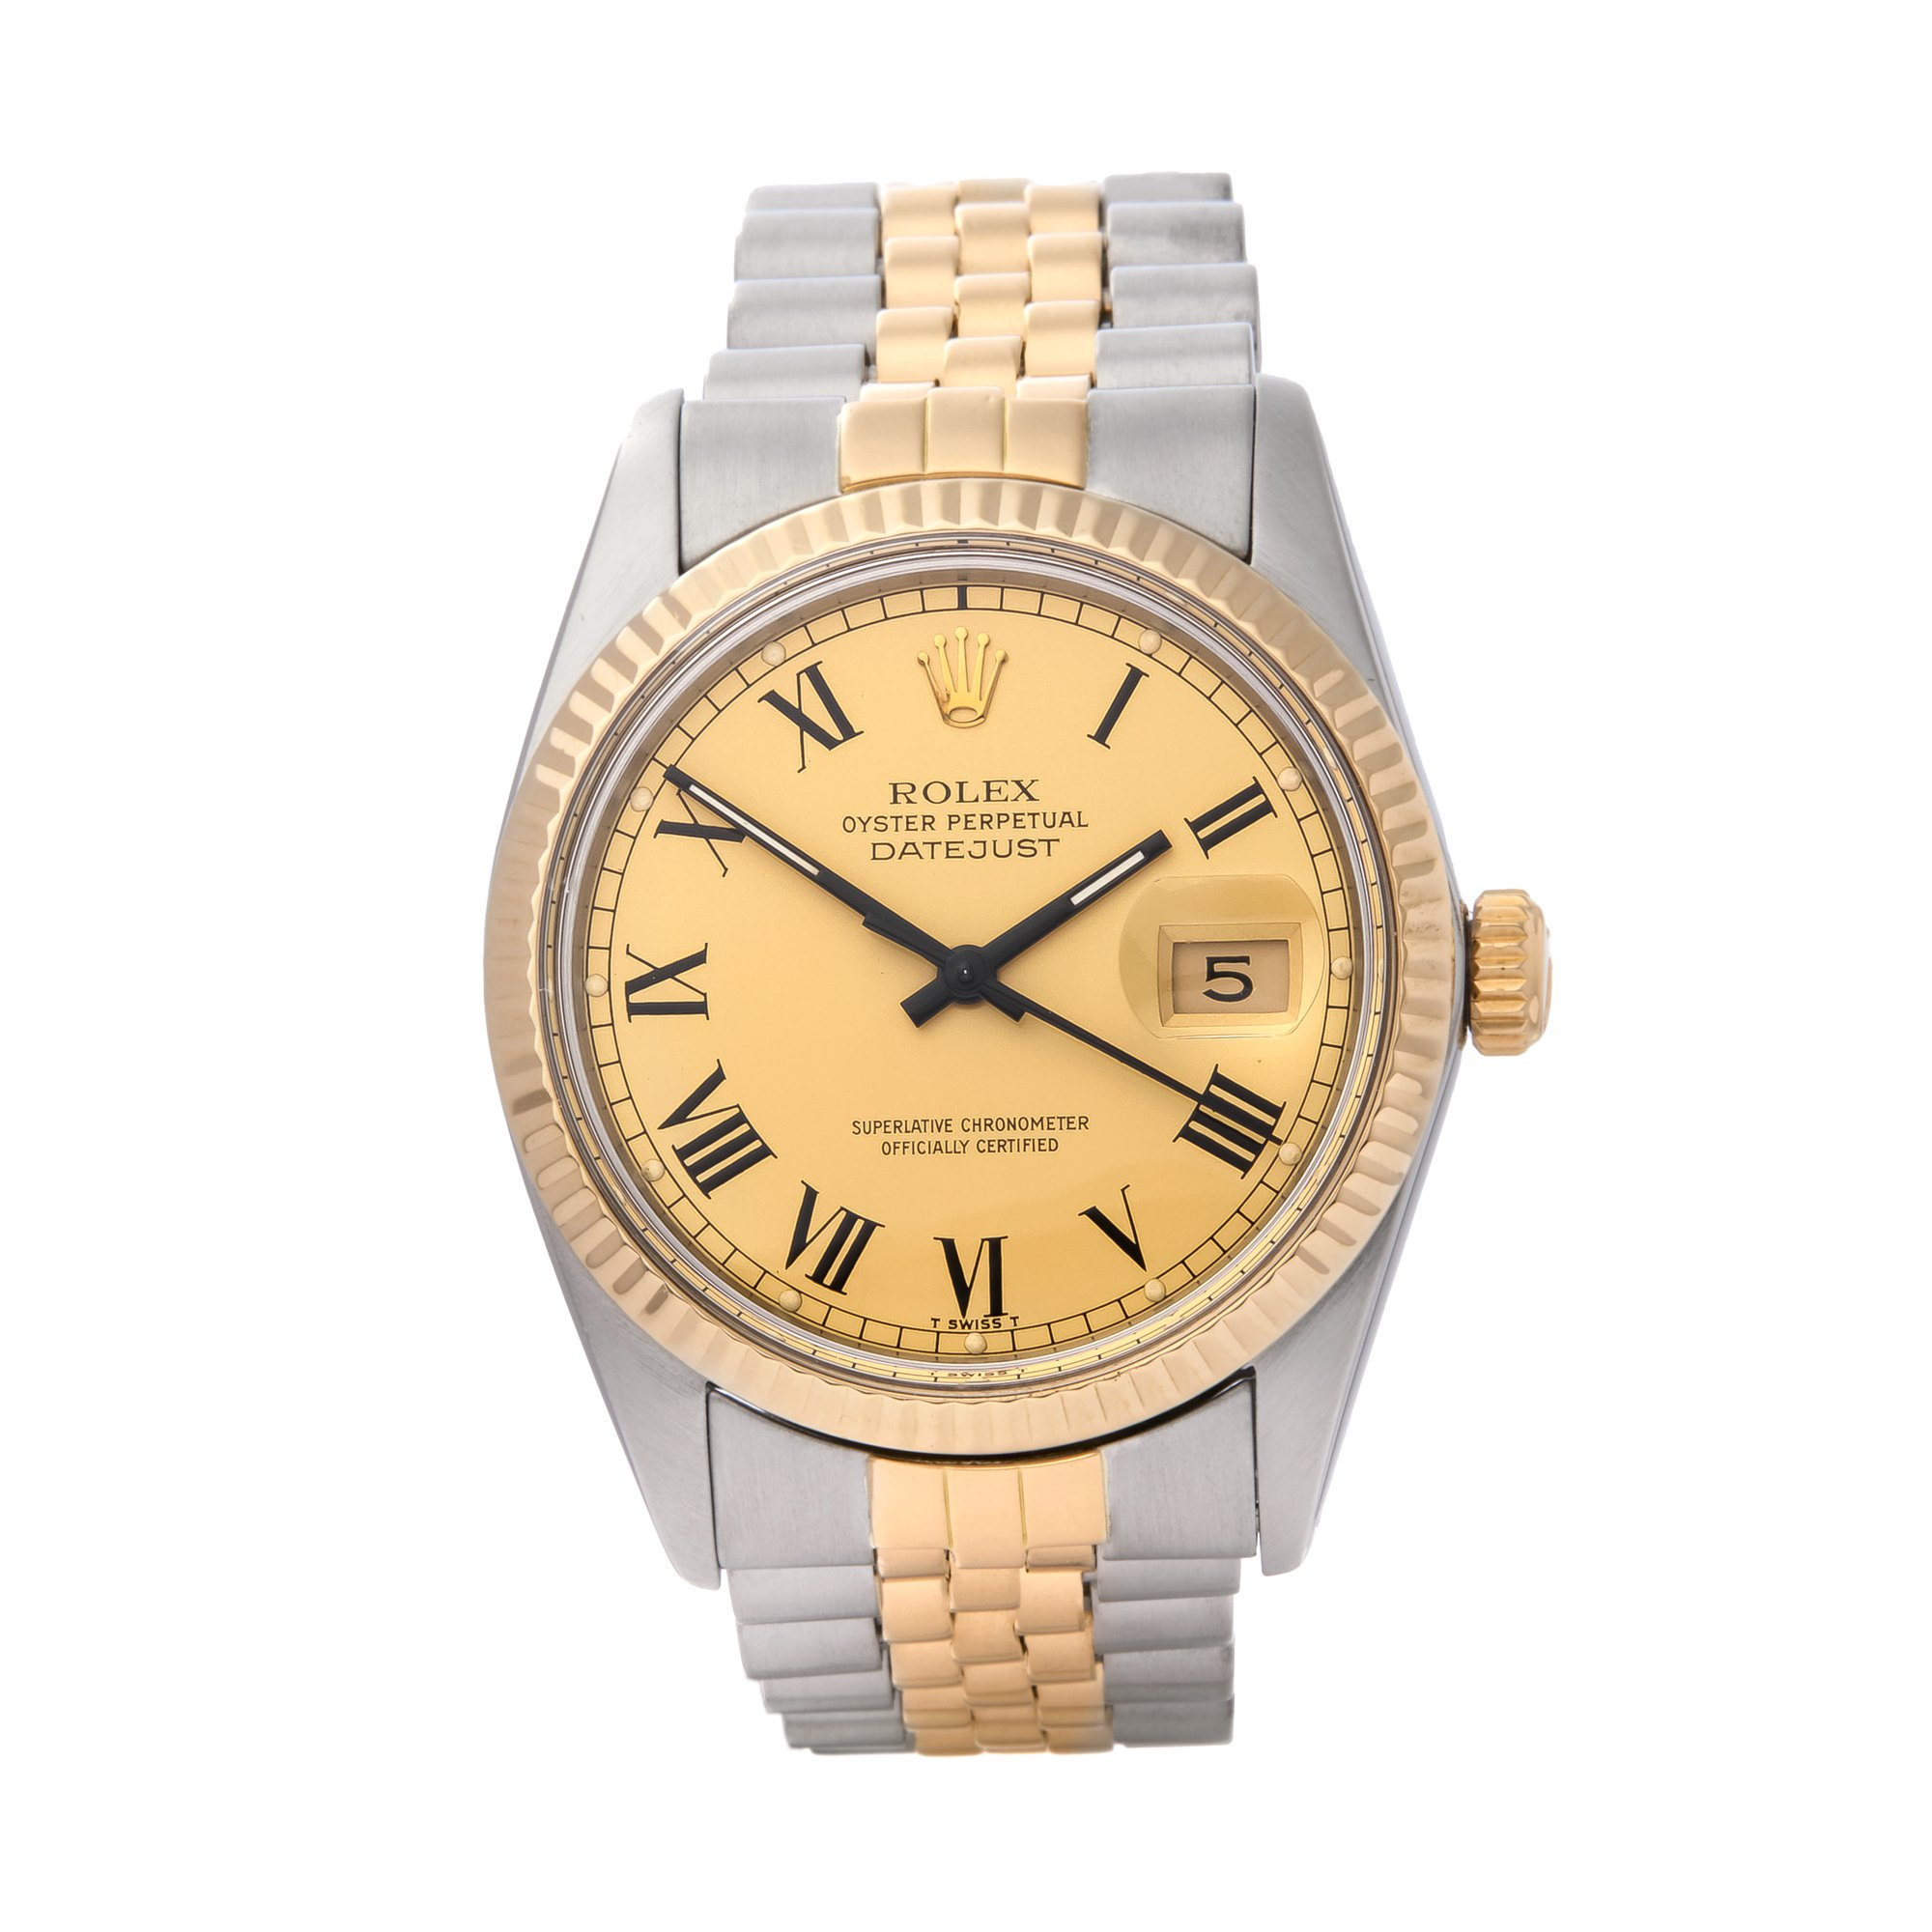 Rolex Datejust 36 "Buckley Dial" Yellow Gold & Stainless Steel 16013